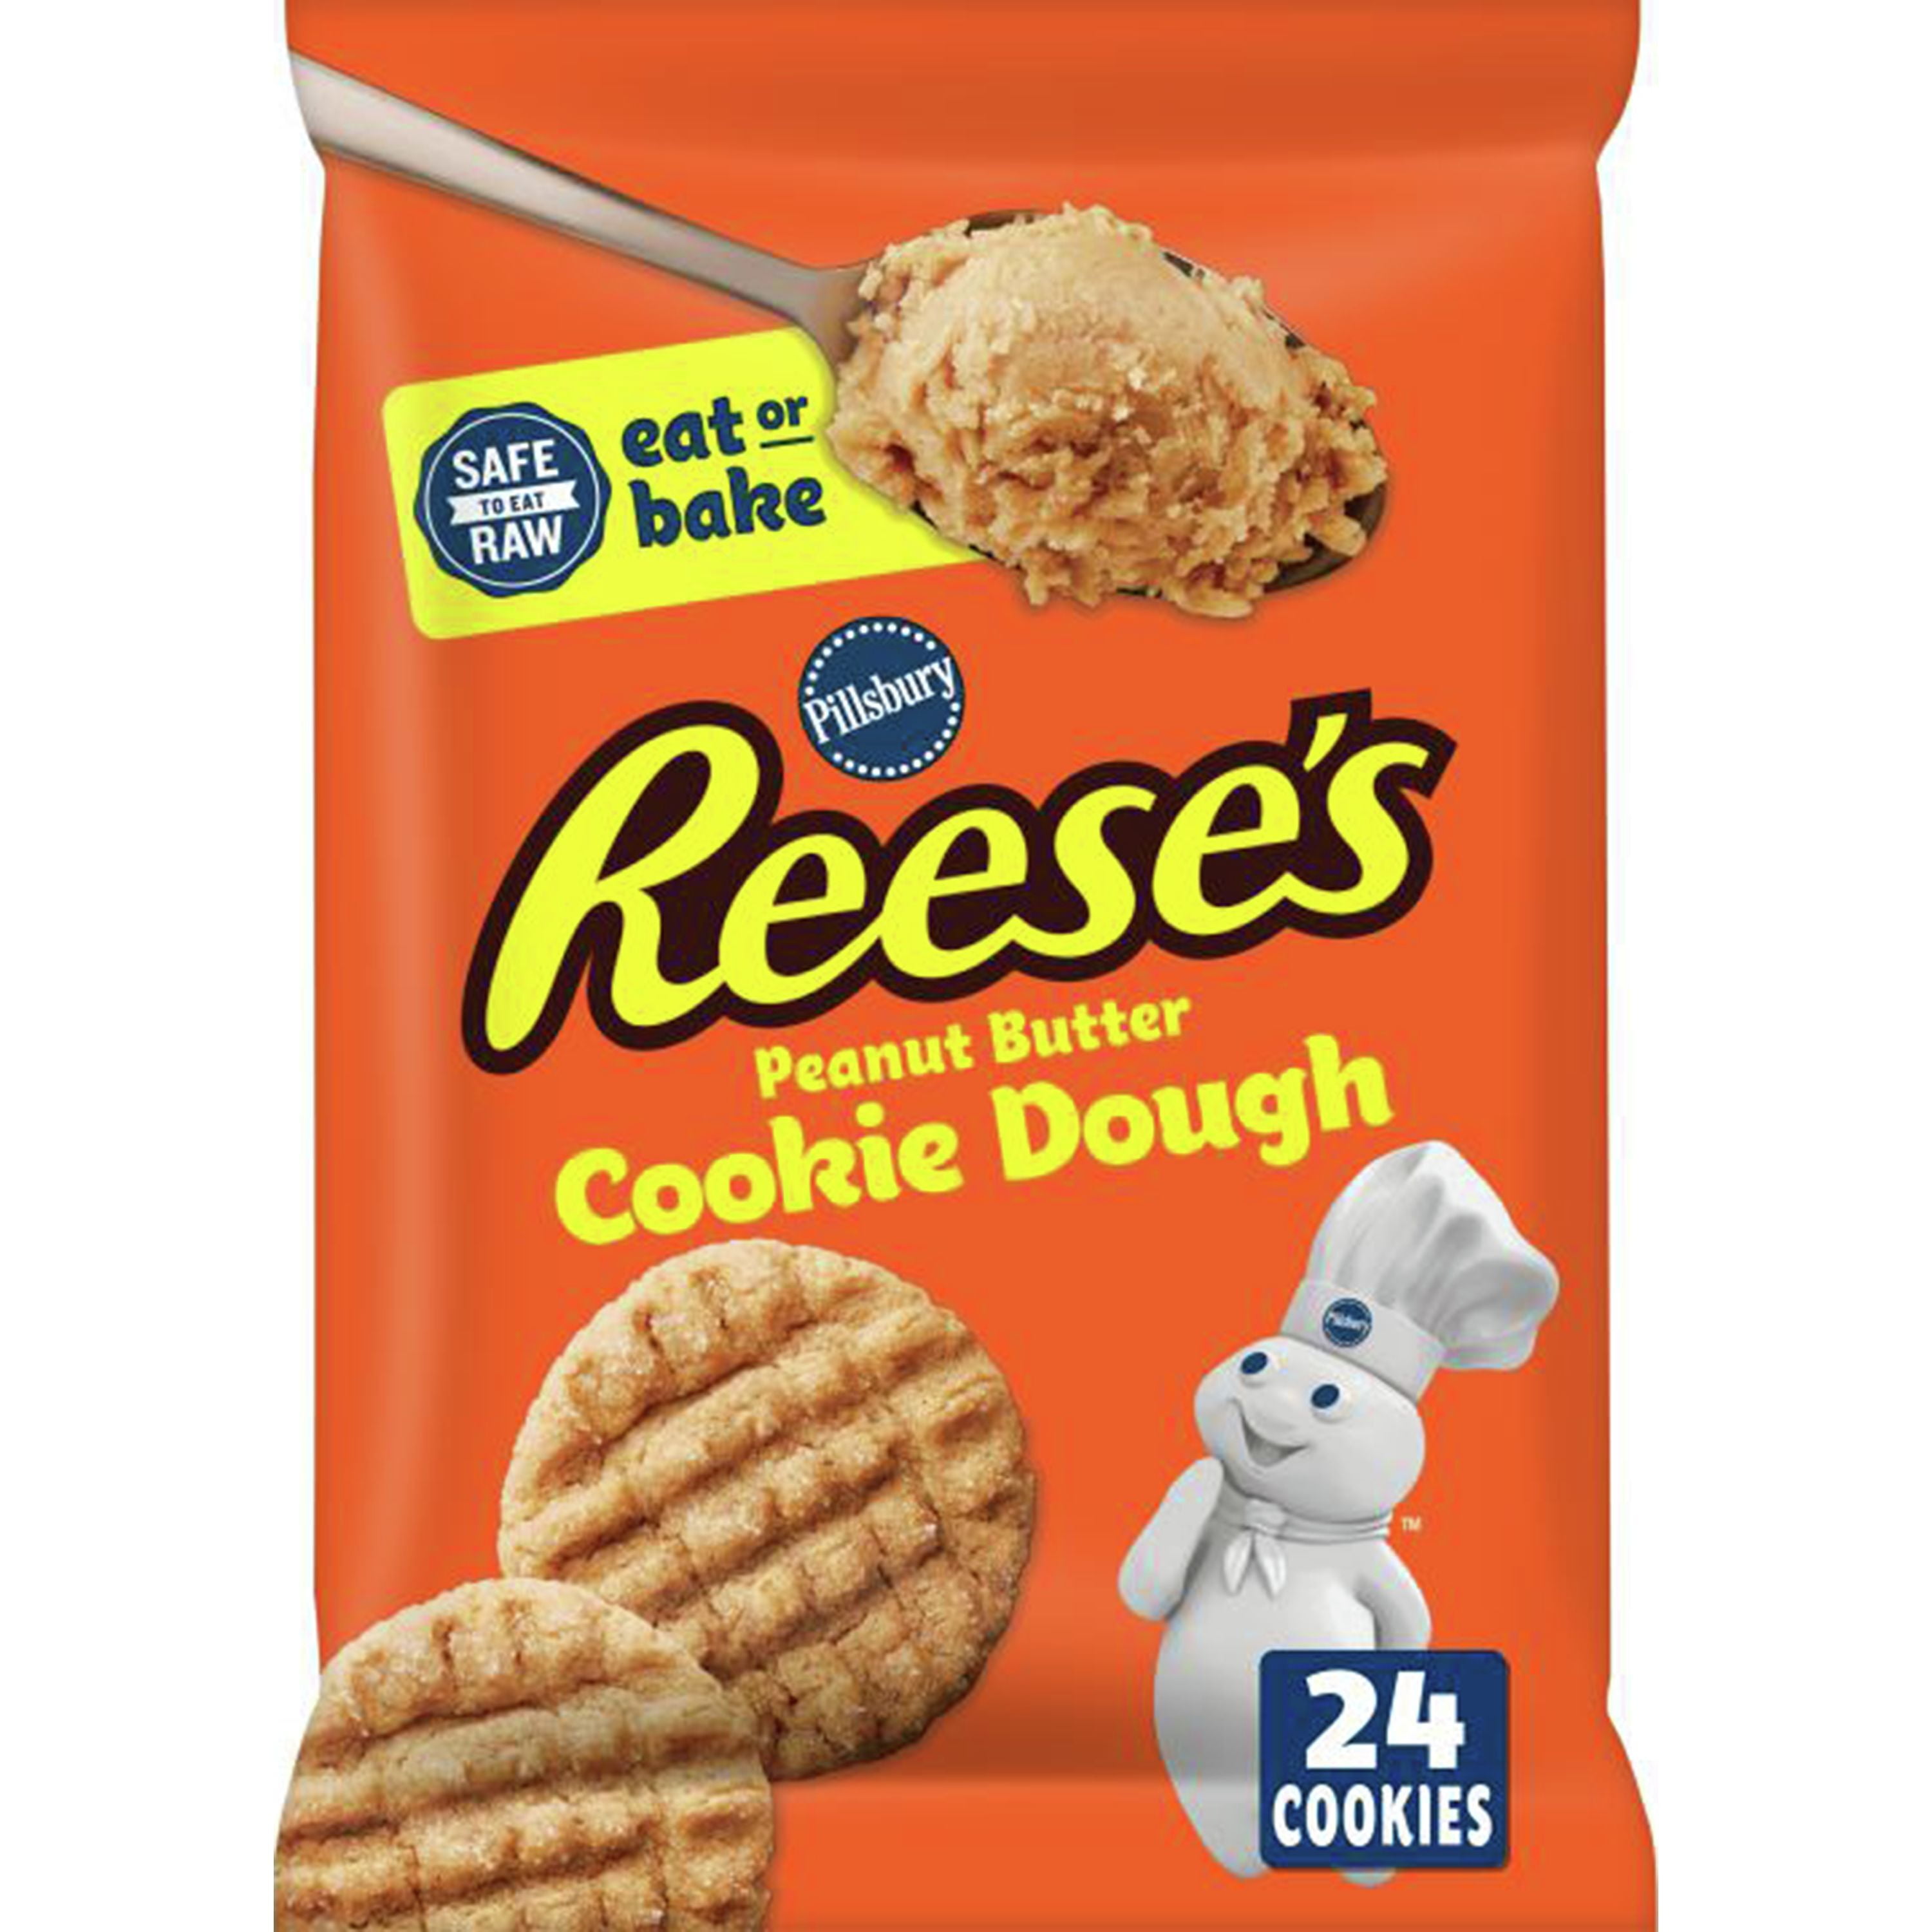 Pillsbury Ready To Bake Refrigerated Reese's Peanut Butter Cookie Dough, 24 ct., 16 oz.